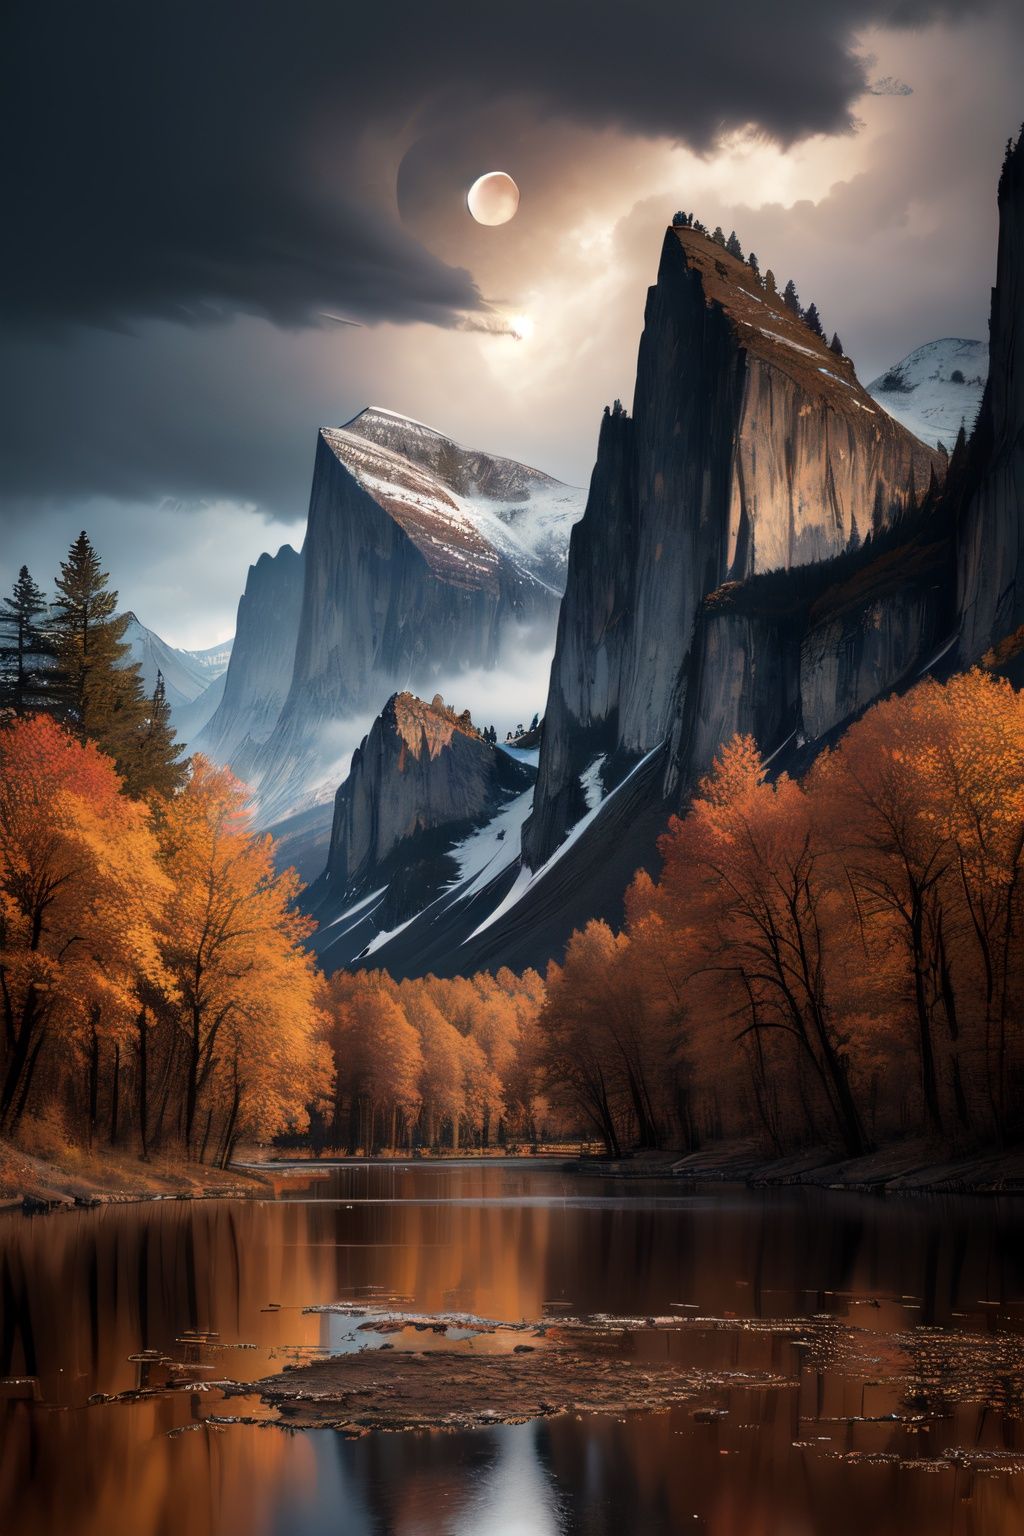 photo RAW,(autumn,mountains and a storm lake with a moon in the sky, old wooden slab home, 4k highly detailed digital art, 4 k hd wallpaper very detailed, impressive fantasy landscape, sci-fi fantasy desktop wallpaper, 4k wallpaper, 4k detailed hdr photography, sci-fi fantasy wallpaper, epic dreamlike fantasy landscape, 4k hd matte, 8k,Realistic, realism, hd, 35mm photograph, 8k), masterpiece, award winning photography, natural light, perfect composition, high detail, hyper realistic, (composition centering, conceptual photography), realistic, detailed, balanced, by Trey Ratcliff, Klaus Herrmann, Serge Ramelli, Jimmy McIntyre, Elia Locardi